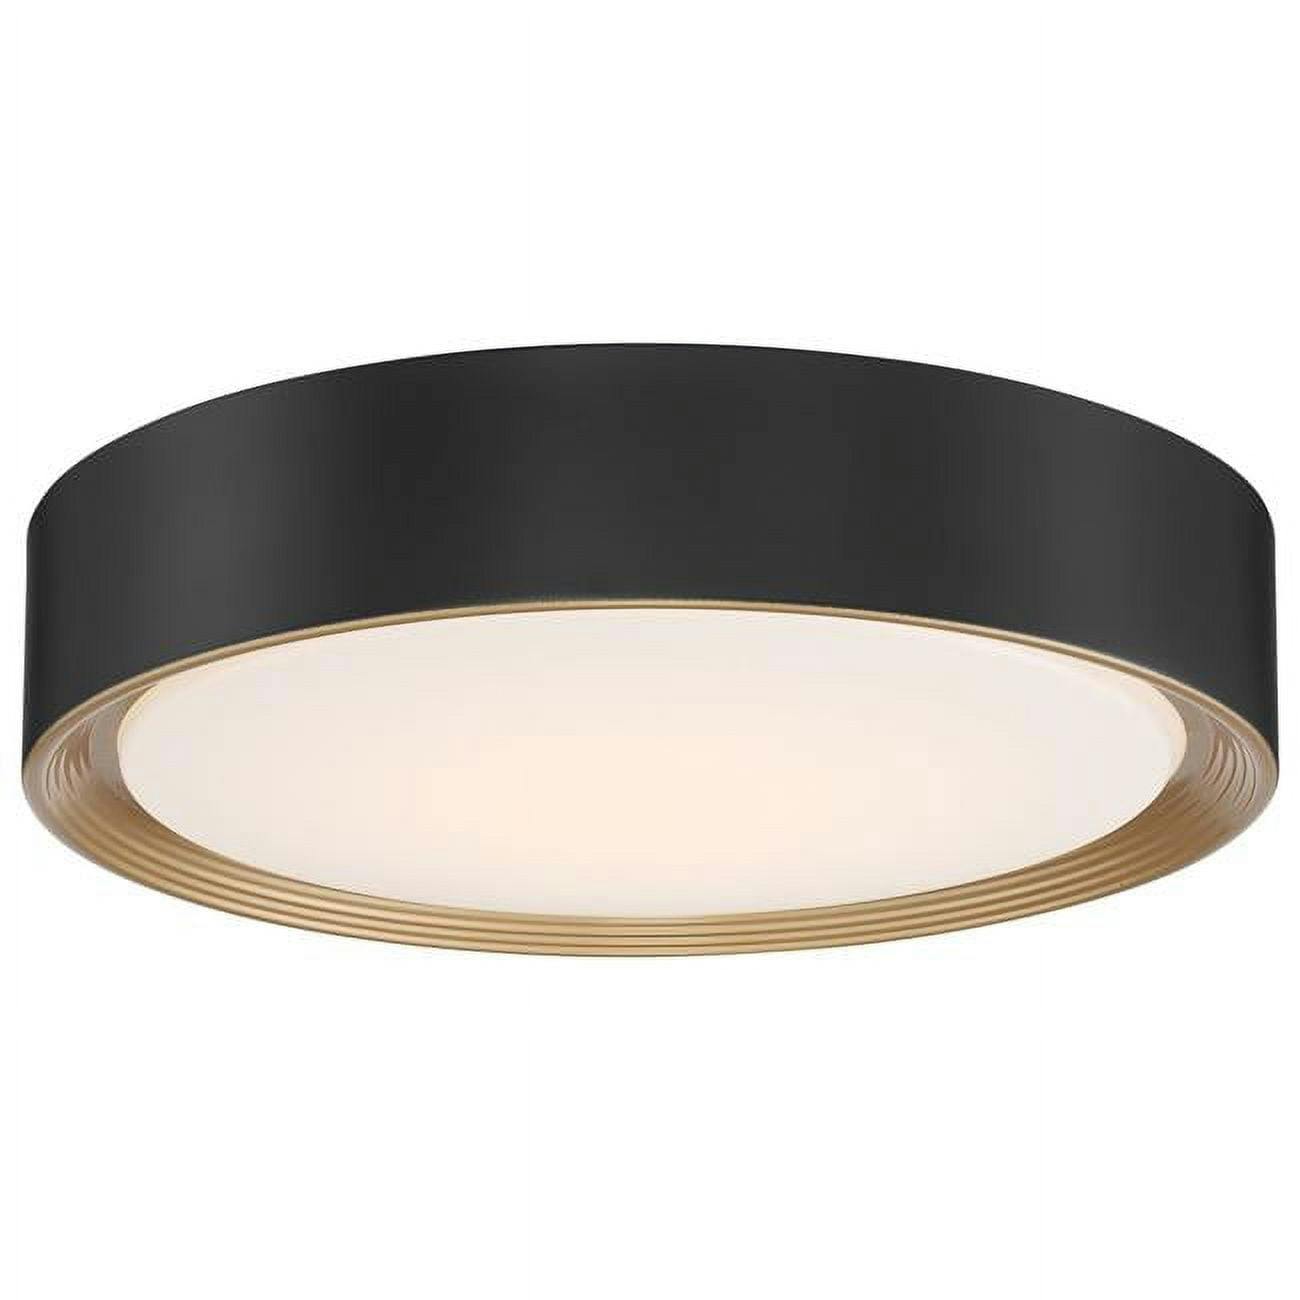 Malaga 24W LED Flush Mount Ceiling Light in Matte Black with Acrylic Lens